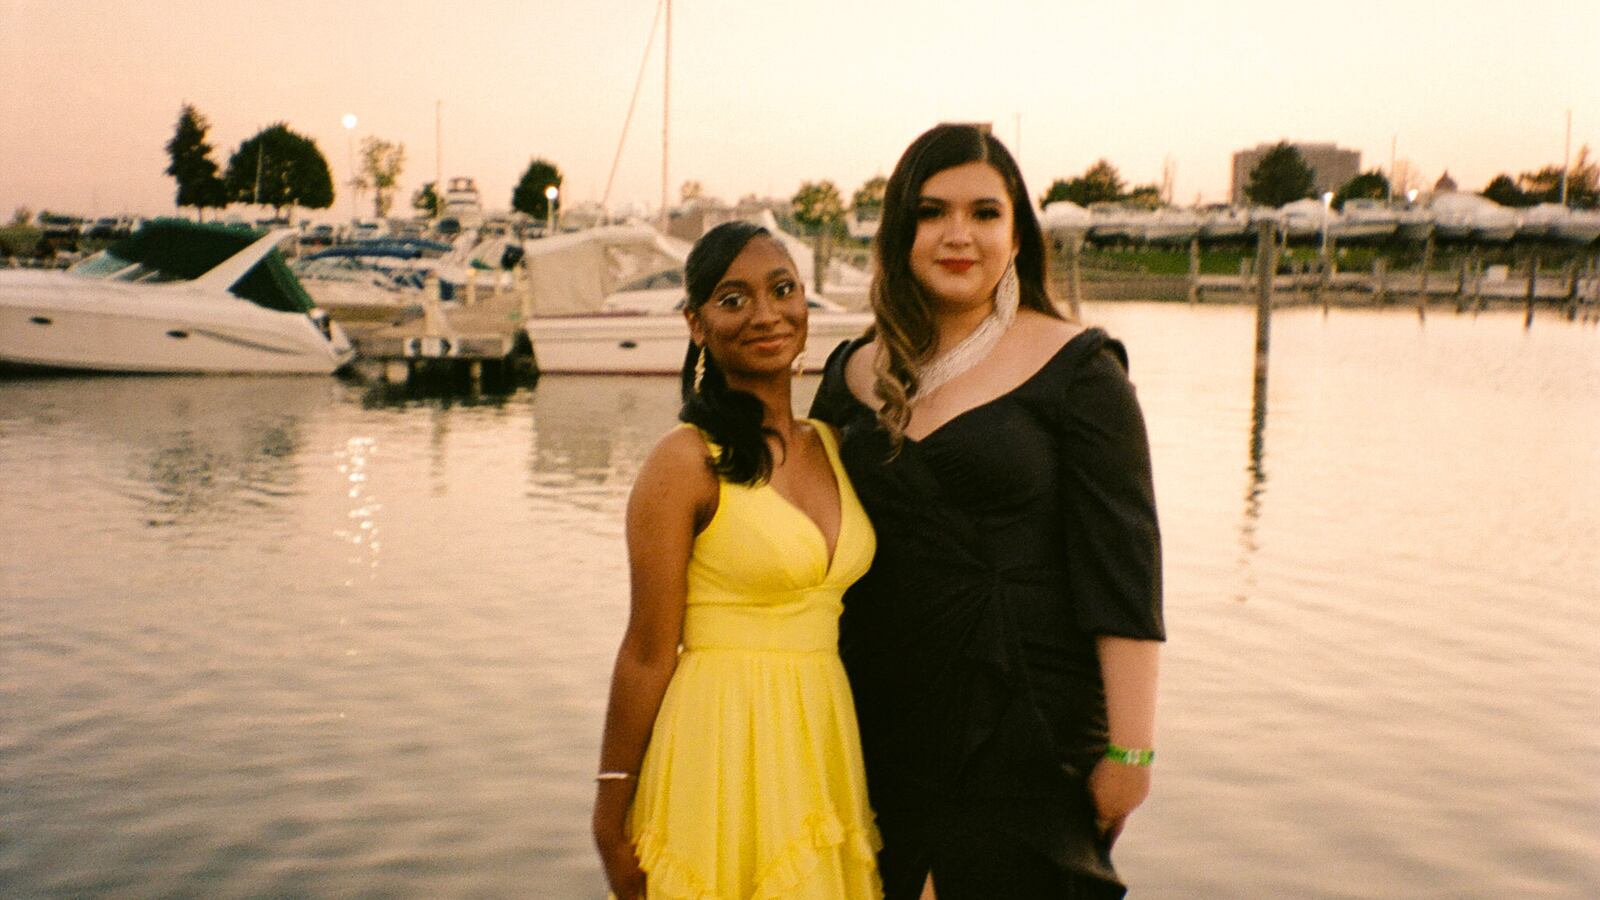 Two young women, one wearing a bright yellow dress and the other wearing a black dress, pose for a portrait together on a dock, boats swaying on the water in the background.